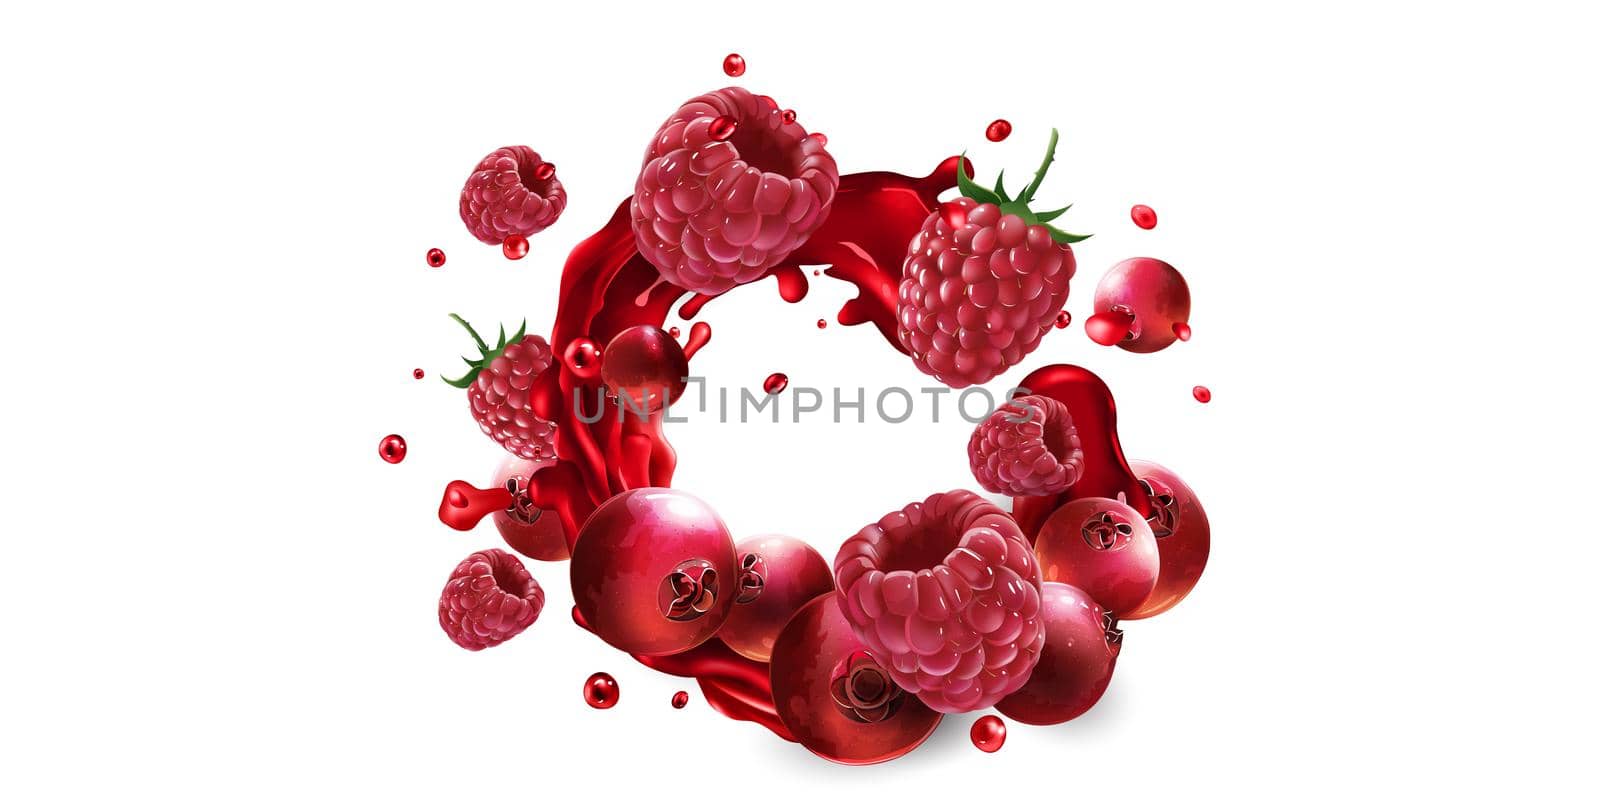 Fresh cranberries and raspberries in fruit juice splashes on a white background. Realistic style illustration.